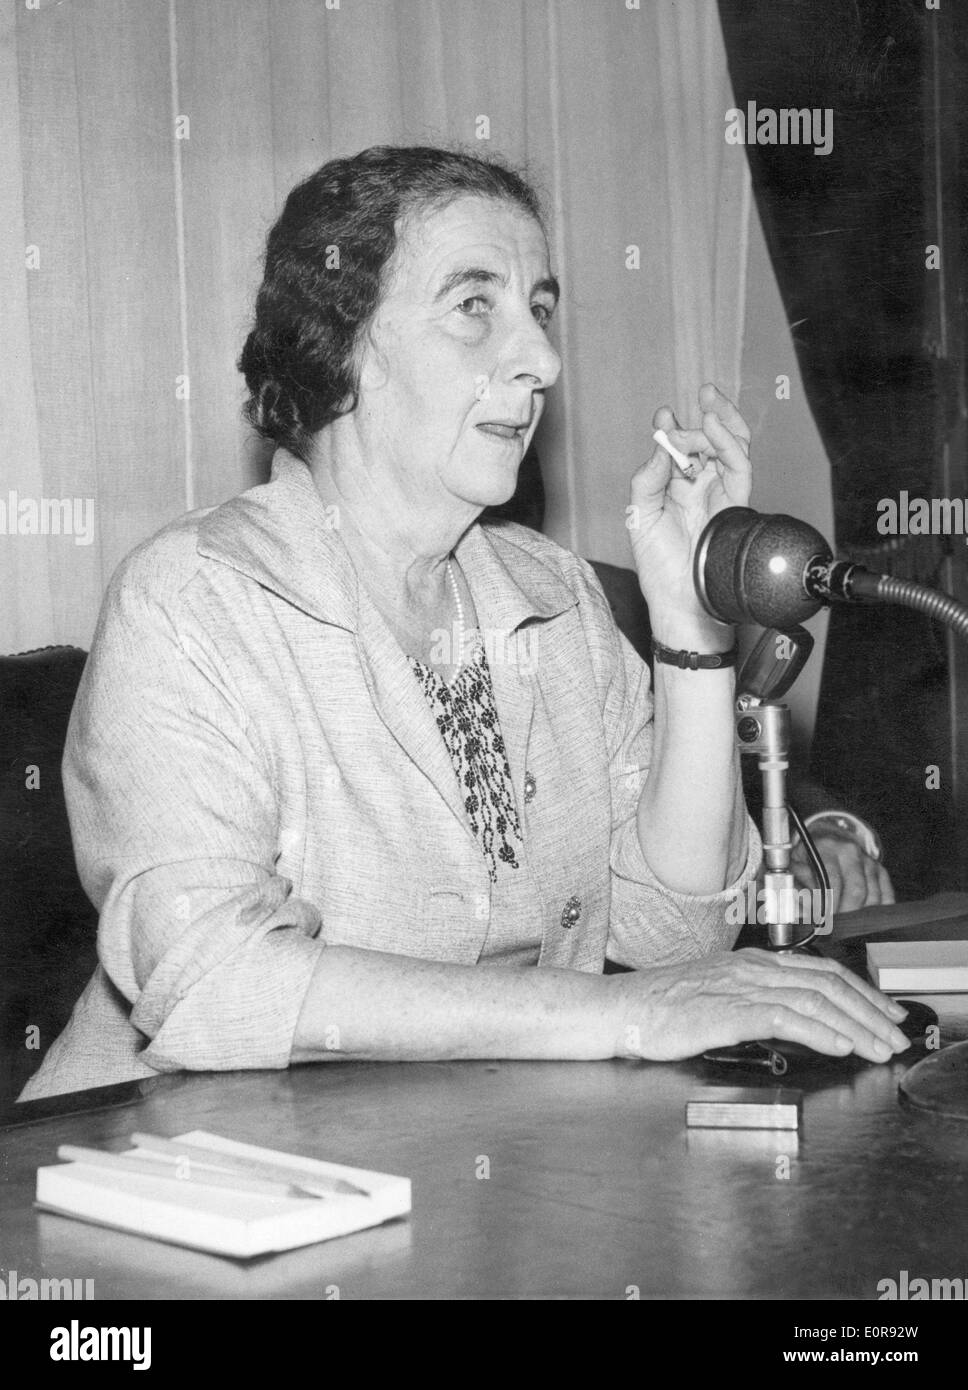 Prime Minister Golda Meir speaks at a press conference Stock Photo